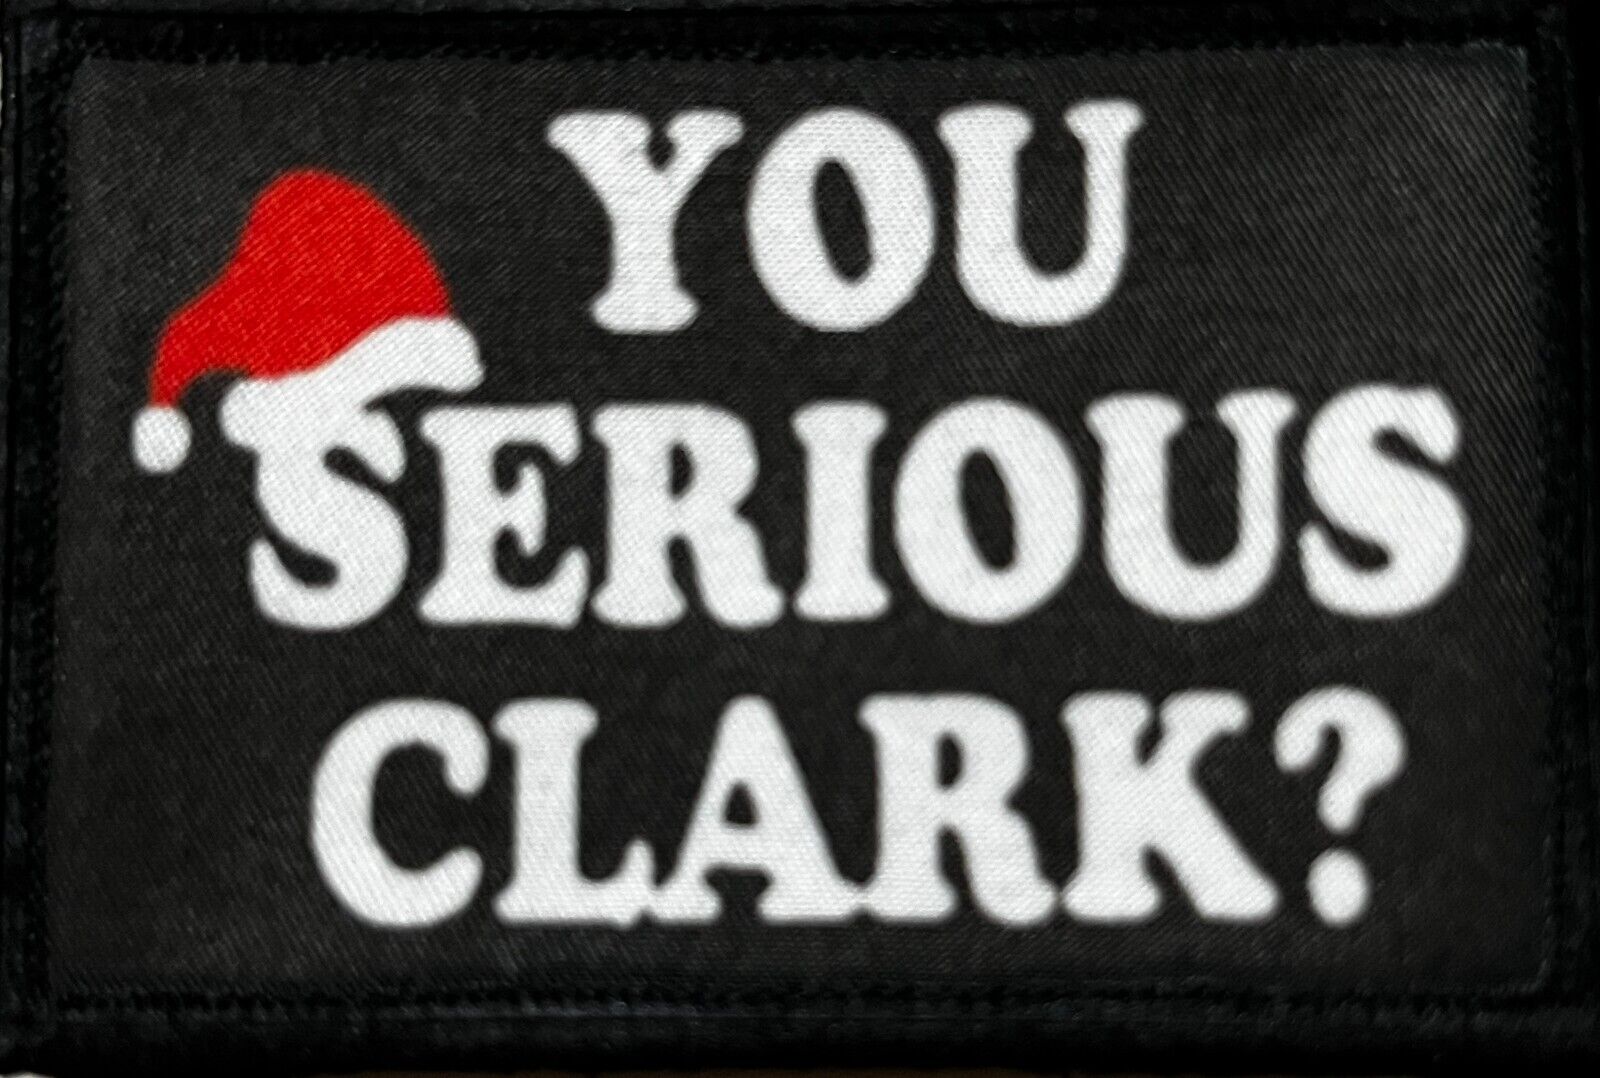 You Serious Clark? Movie Morale Patch Funny Tactical Military